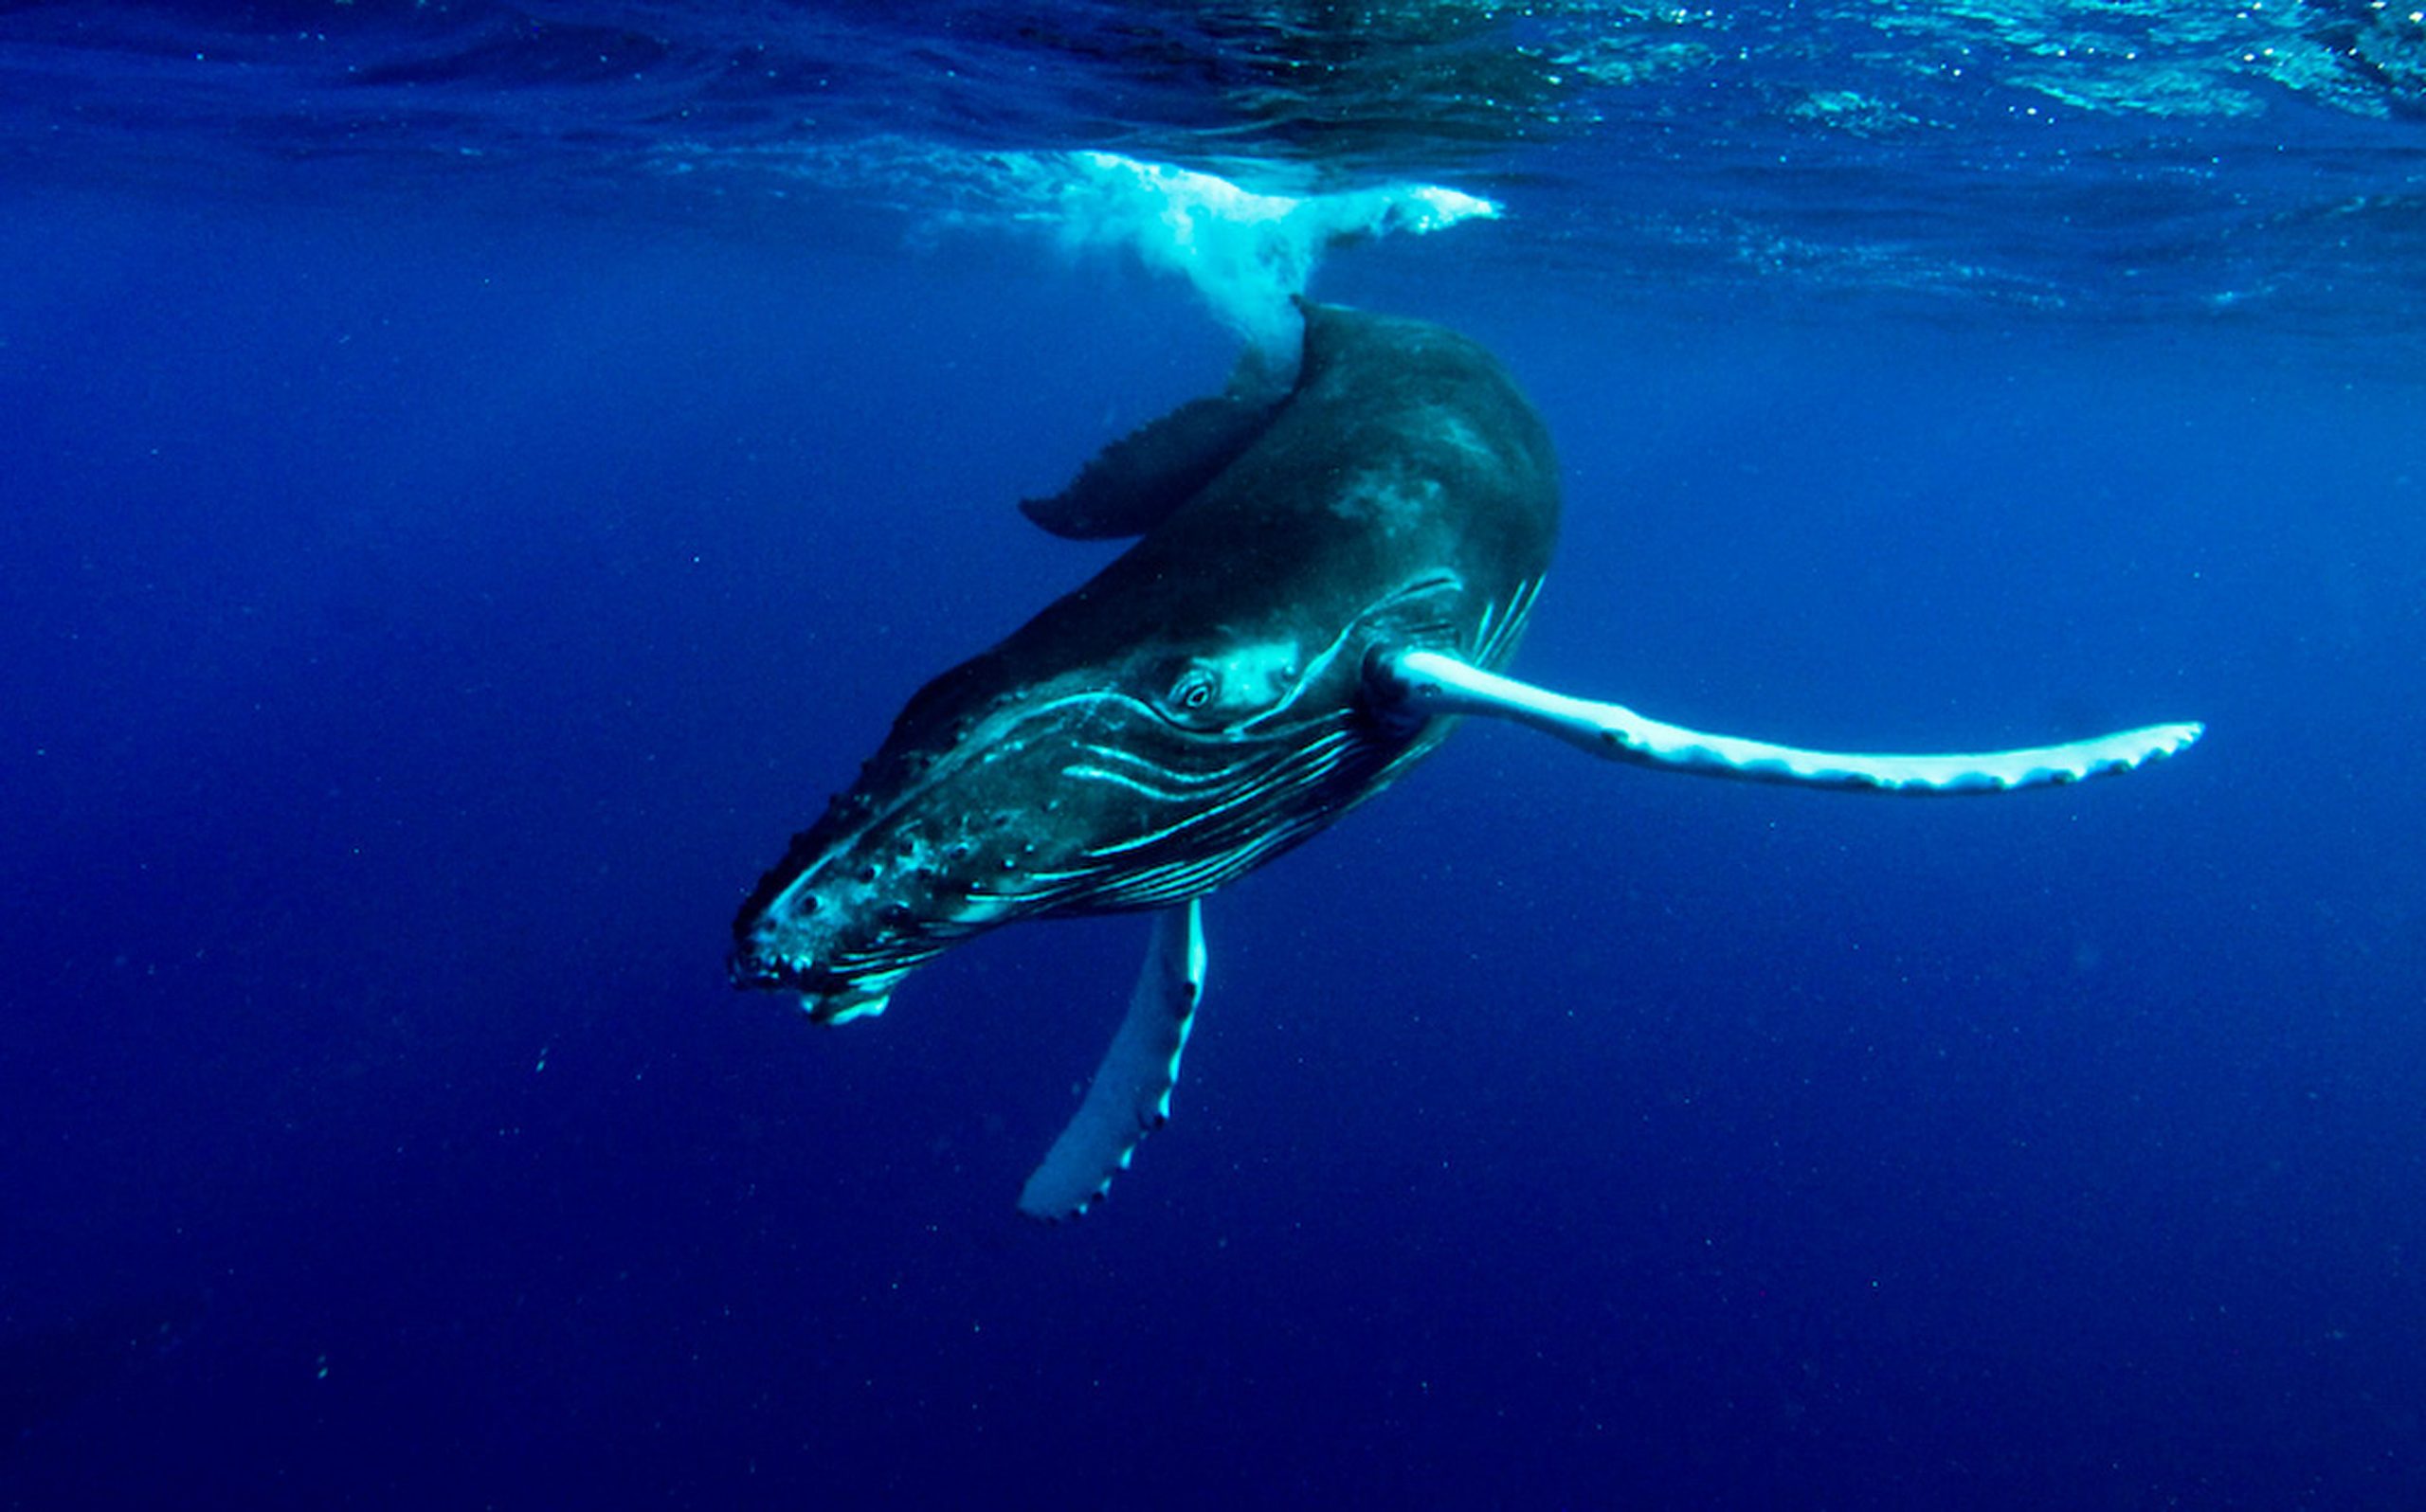 Snorkeling with a humpback whale was a once-in-a-lifetime encounter. Humpback mothers take their young calves to a region of shallow ocean between the Dominican Republic and the Turks and Caicos known as the Silver Banks in winter so they can grow without fear of deep ocean predators. 